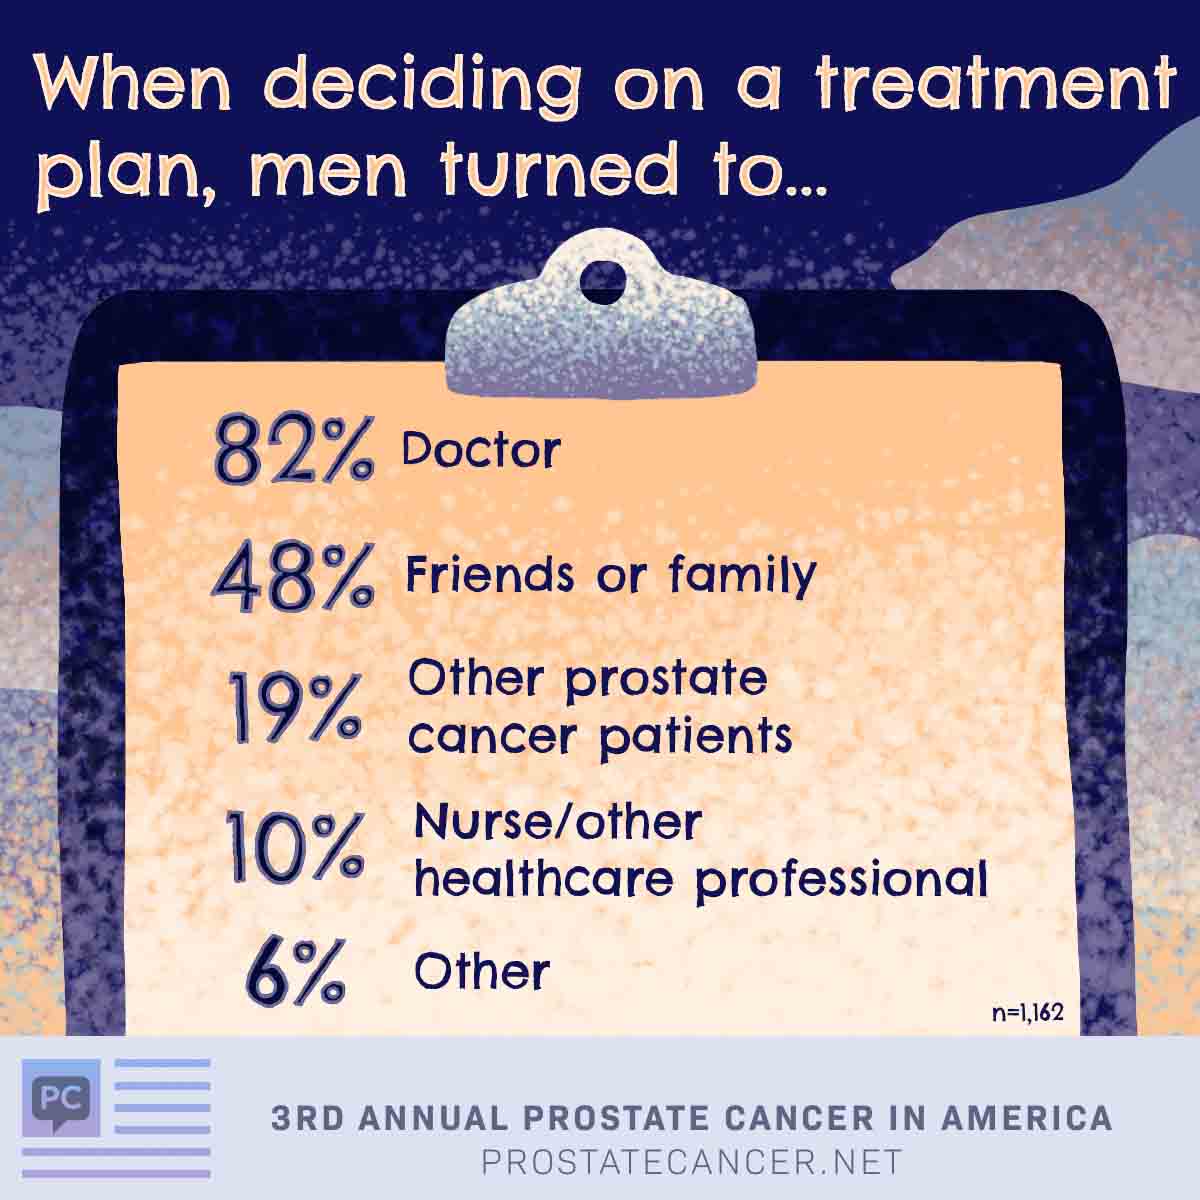 When deciding on a treatment plan, men turn to doctor 82%, friends or family 48%, other prostate cancer patients 19%, nurse or other healthcare professional 10%, other 6%